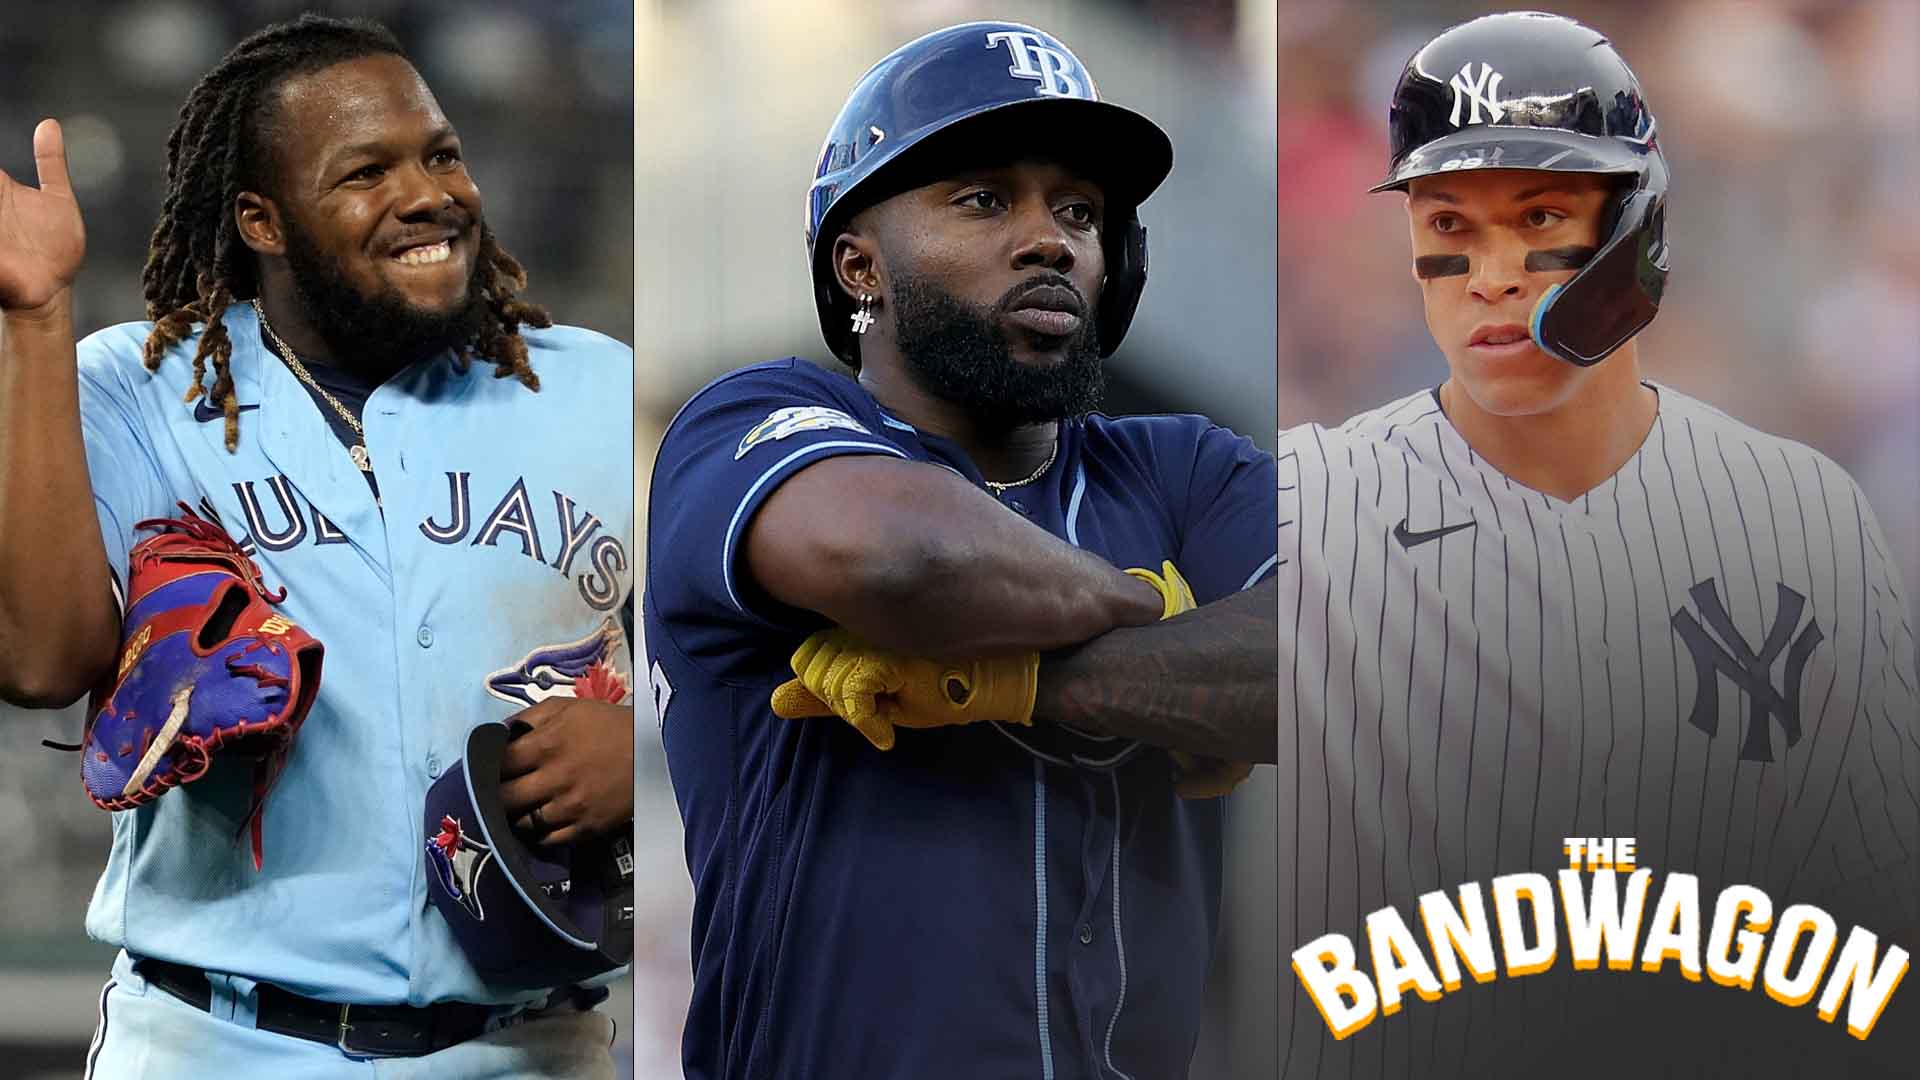 MLB Tiers: From the Royals to the Rays, grading baseball's best